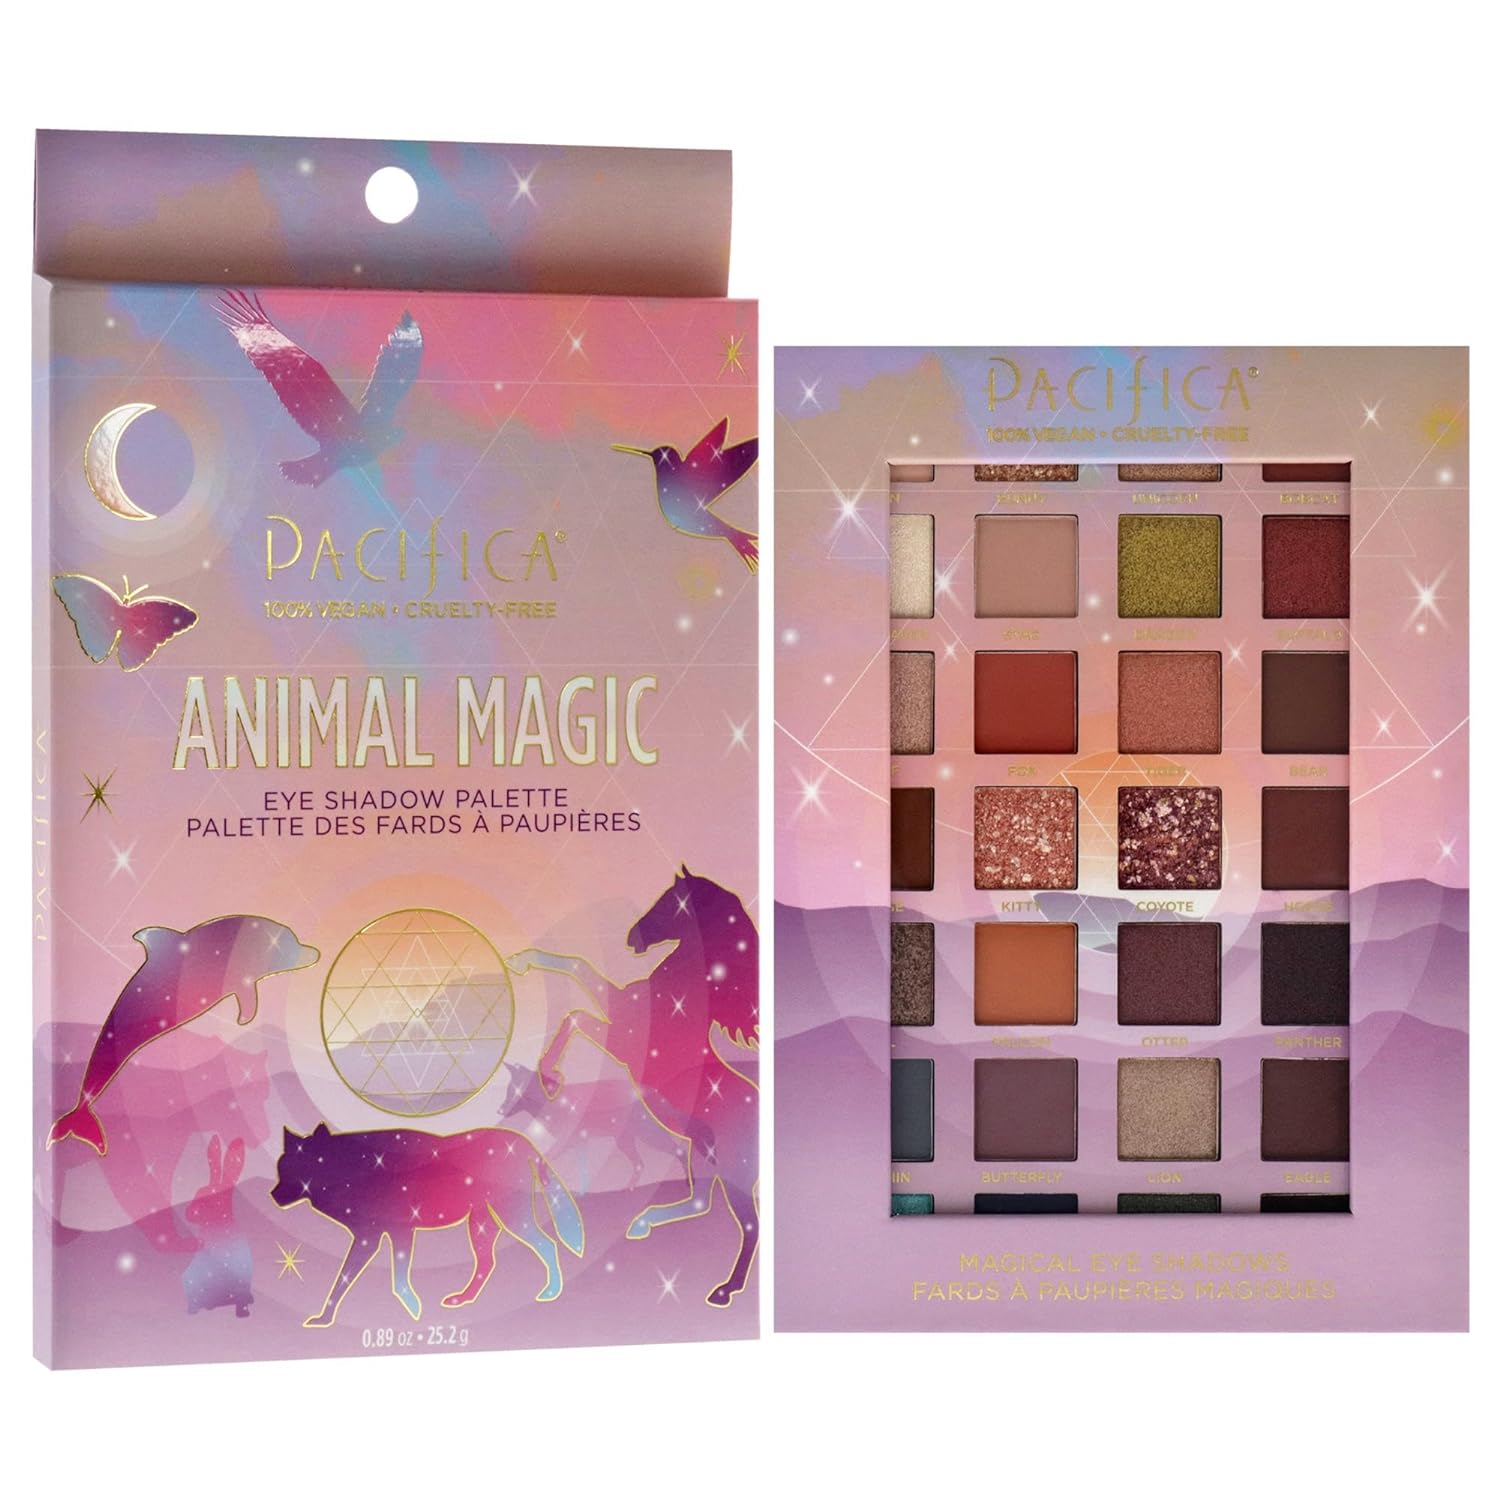 Pacifica Beauty, Animal Magic Eye Shadow Palette, 28 Eyeshadow Shades, Mineral Eyeshadow, Matte, Shimmer and Glitter Mica Shades, Vitamin E, Made from 100% Recyclable Paper, Vegan and Cruelty Free : Everything Else